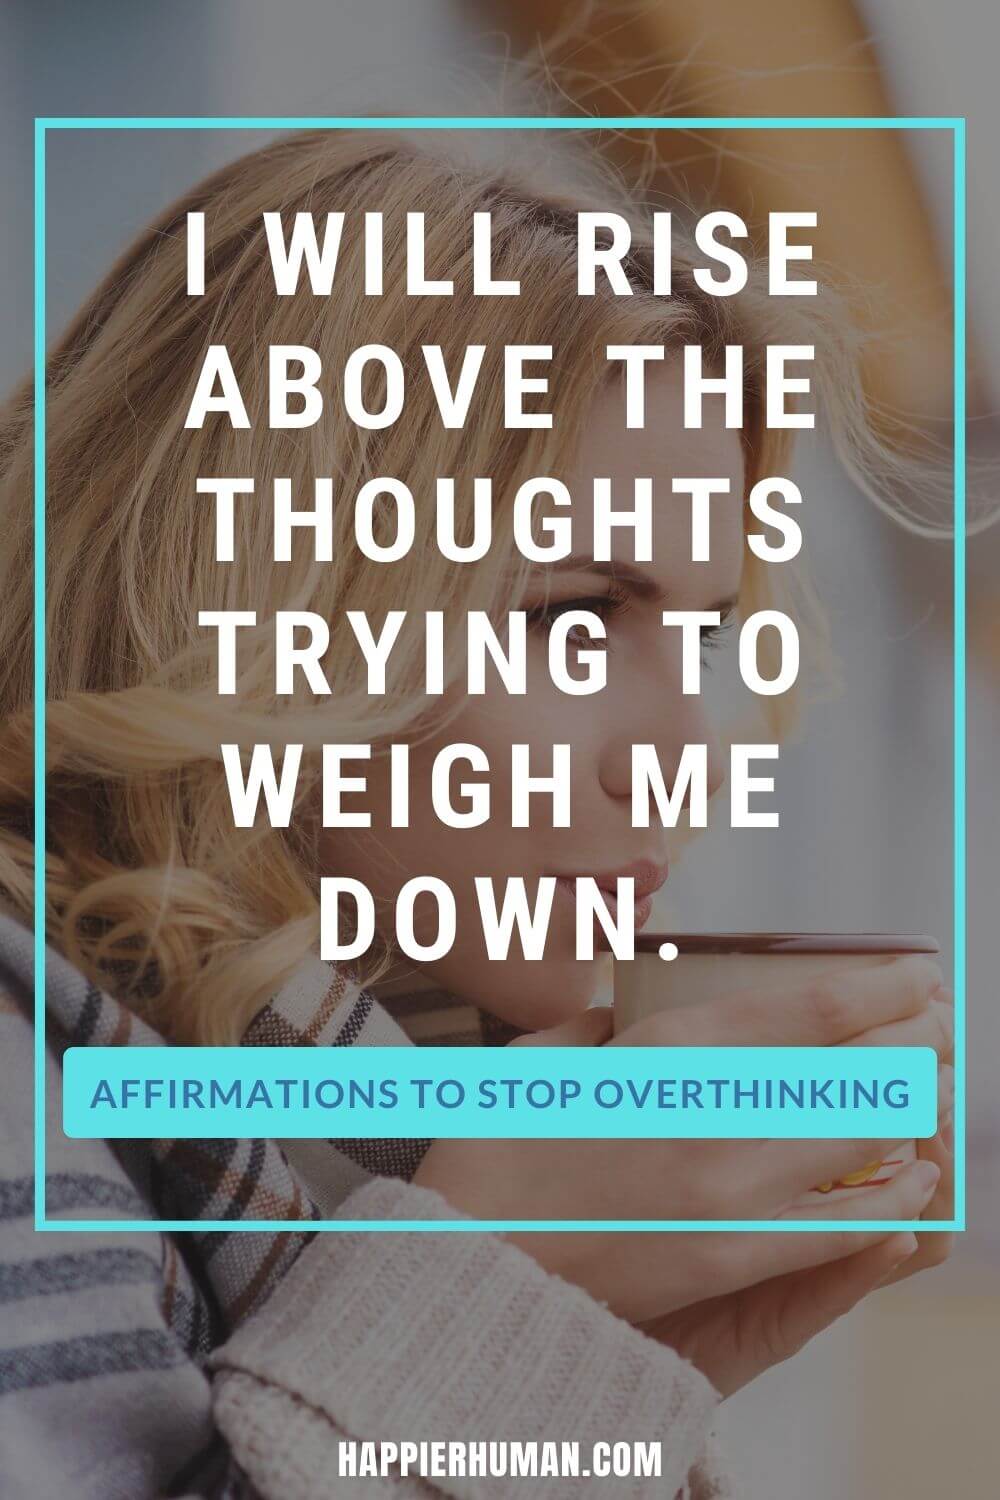 Affirmations for Overthinking - I will rise above the thoughts trying to weigh me down. | positive affirmations for sadness |affirmations for confidence | positive affirmations for rumination